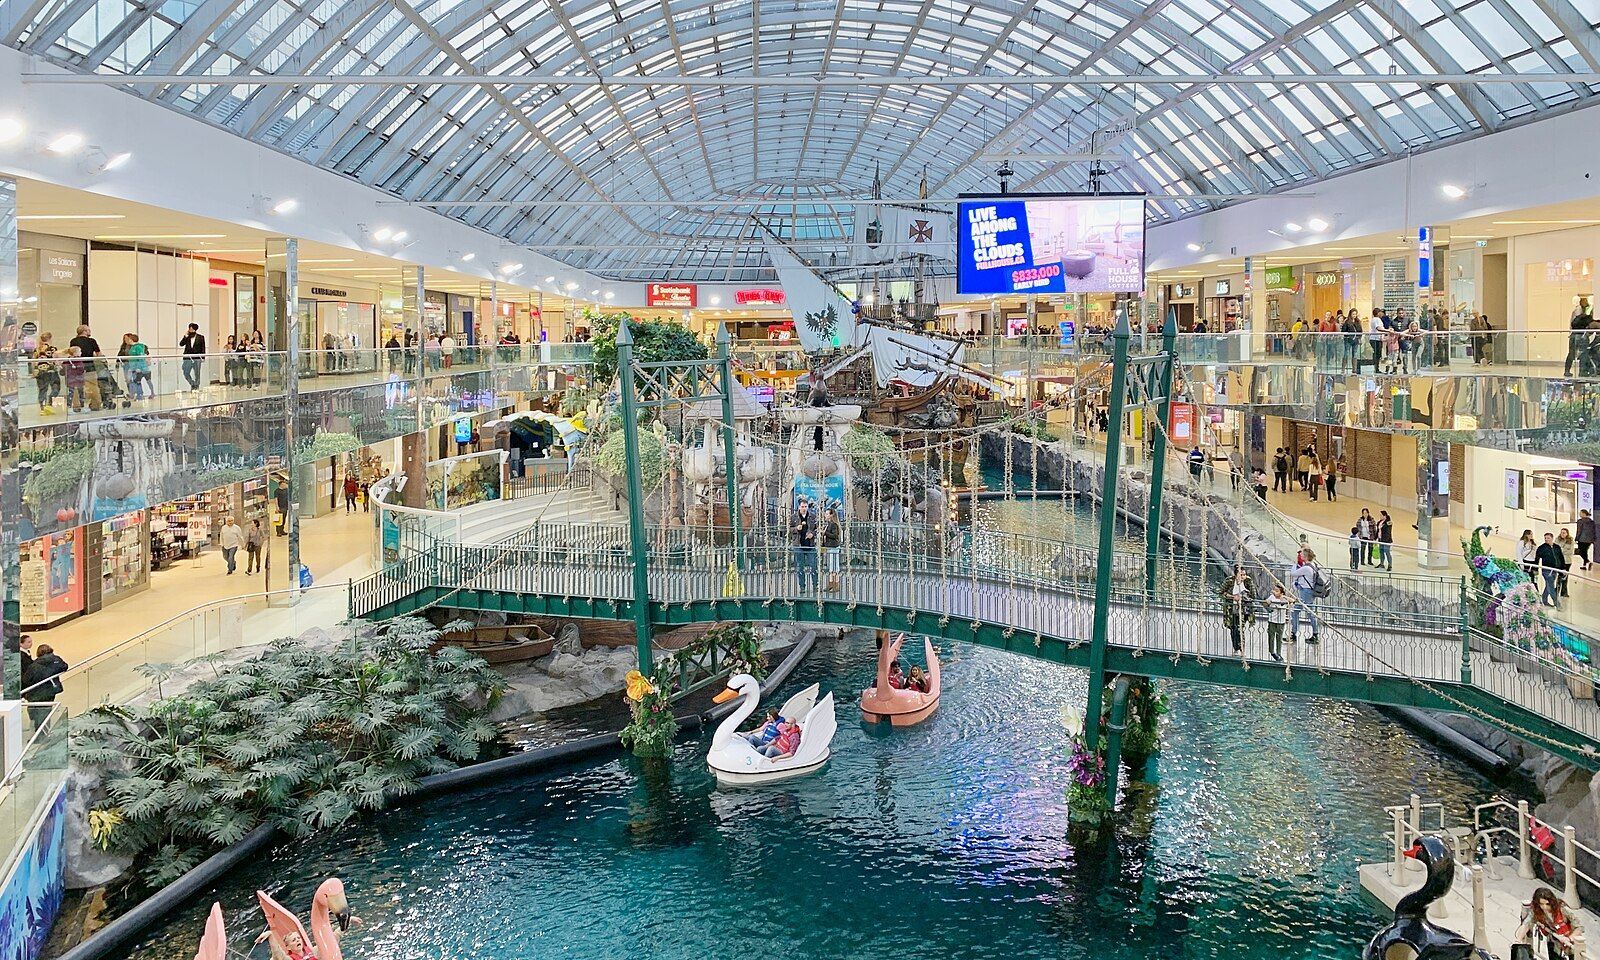 <p>Proudly carrying the title of North America’s Largest Mall each year, <a href="https://www.wem.ca/">West Edmonton Mall</a> attracts tourists in the millions with its 800 stores and services, more than 100 dining options, an urban bazaar, a zoo, a skating rink, a mini-golf course, water slides, an amusement park, an artificial lake, and more across 490,000 square meters (5.3 million square feet)—the size of a small city! While this mall is a hoot for families and visitors from all walks of life, it doesn’t come cheap. If you’re going to visit Alberta, you could skip this indoor tourist trap in favour of Alberta’s natural attractions, like <a href="https://www.travelalberta.com/places-to-go/albertas-regions/canadian-rockies">the Canadian Rockies</a>.</p>